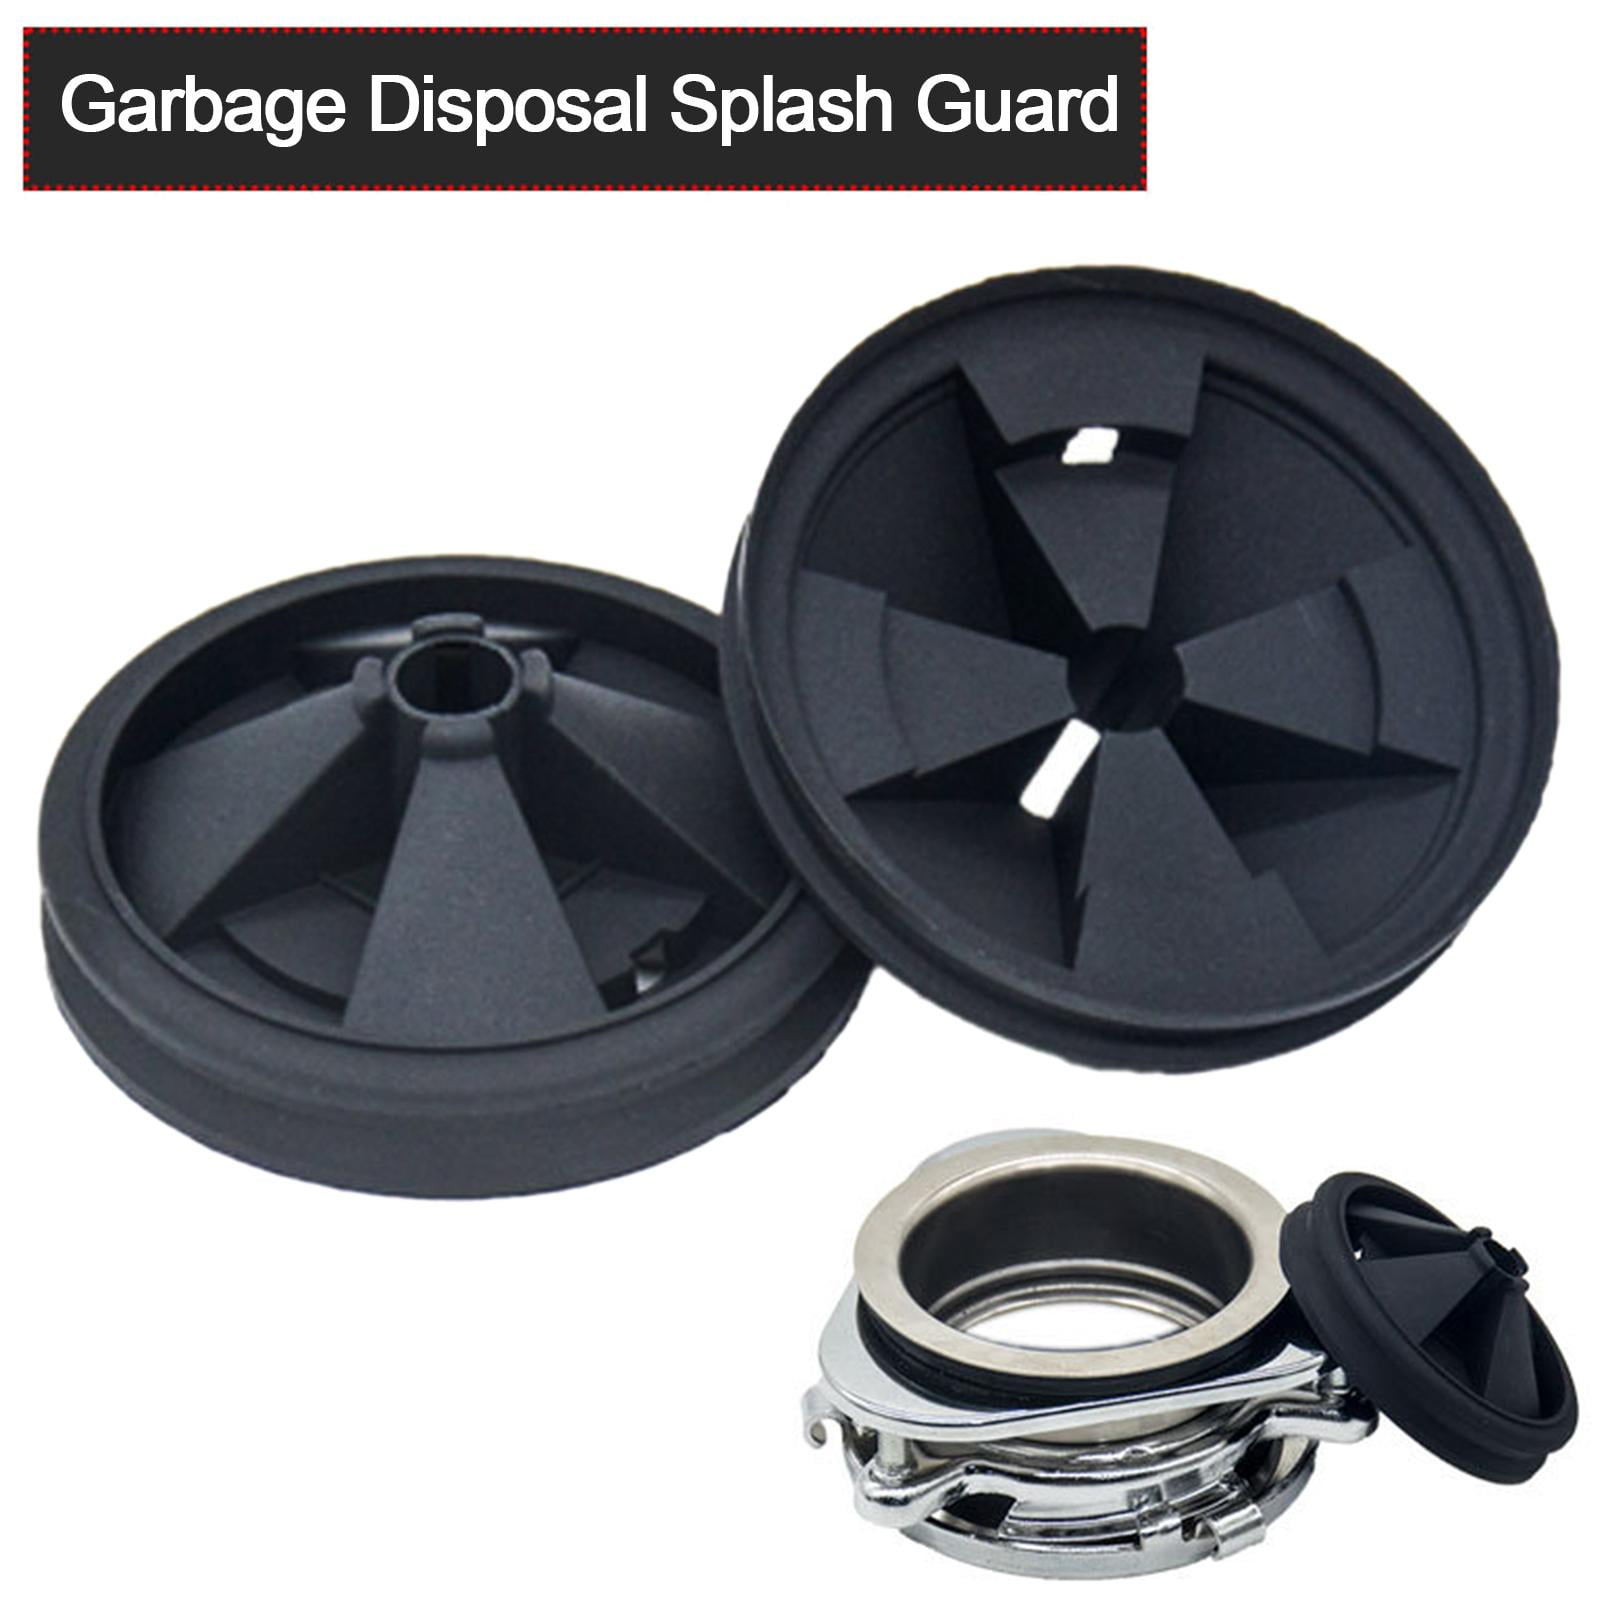 Garbage Disposal Splash Guard Slow to Drain? Here's How to Fix